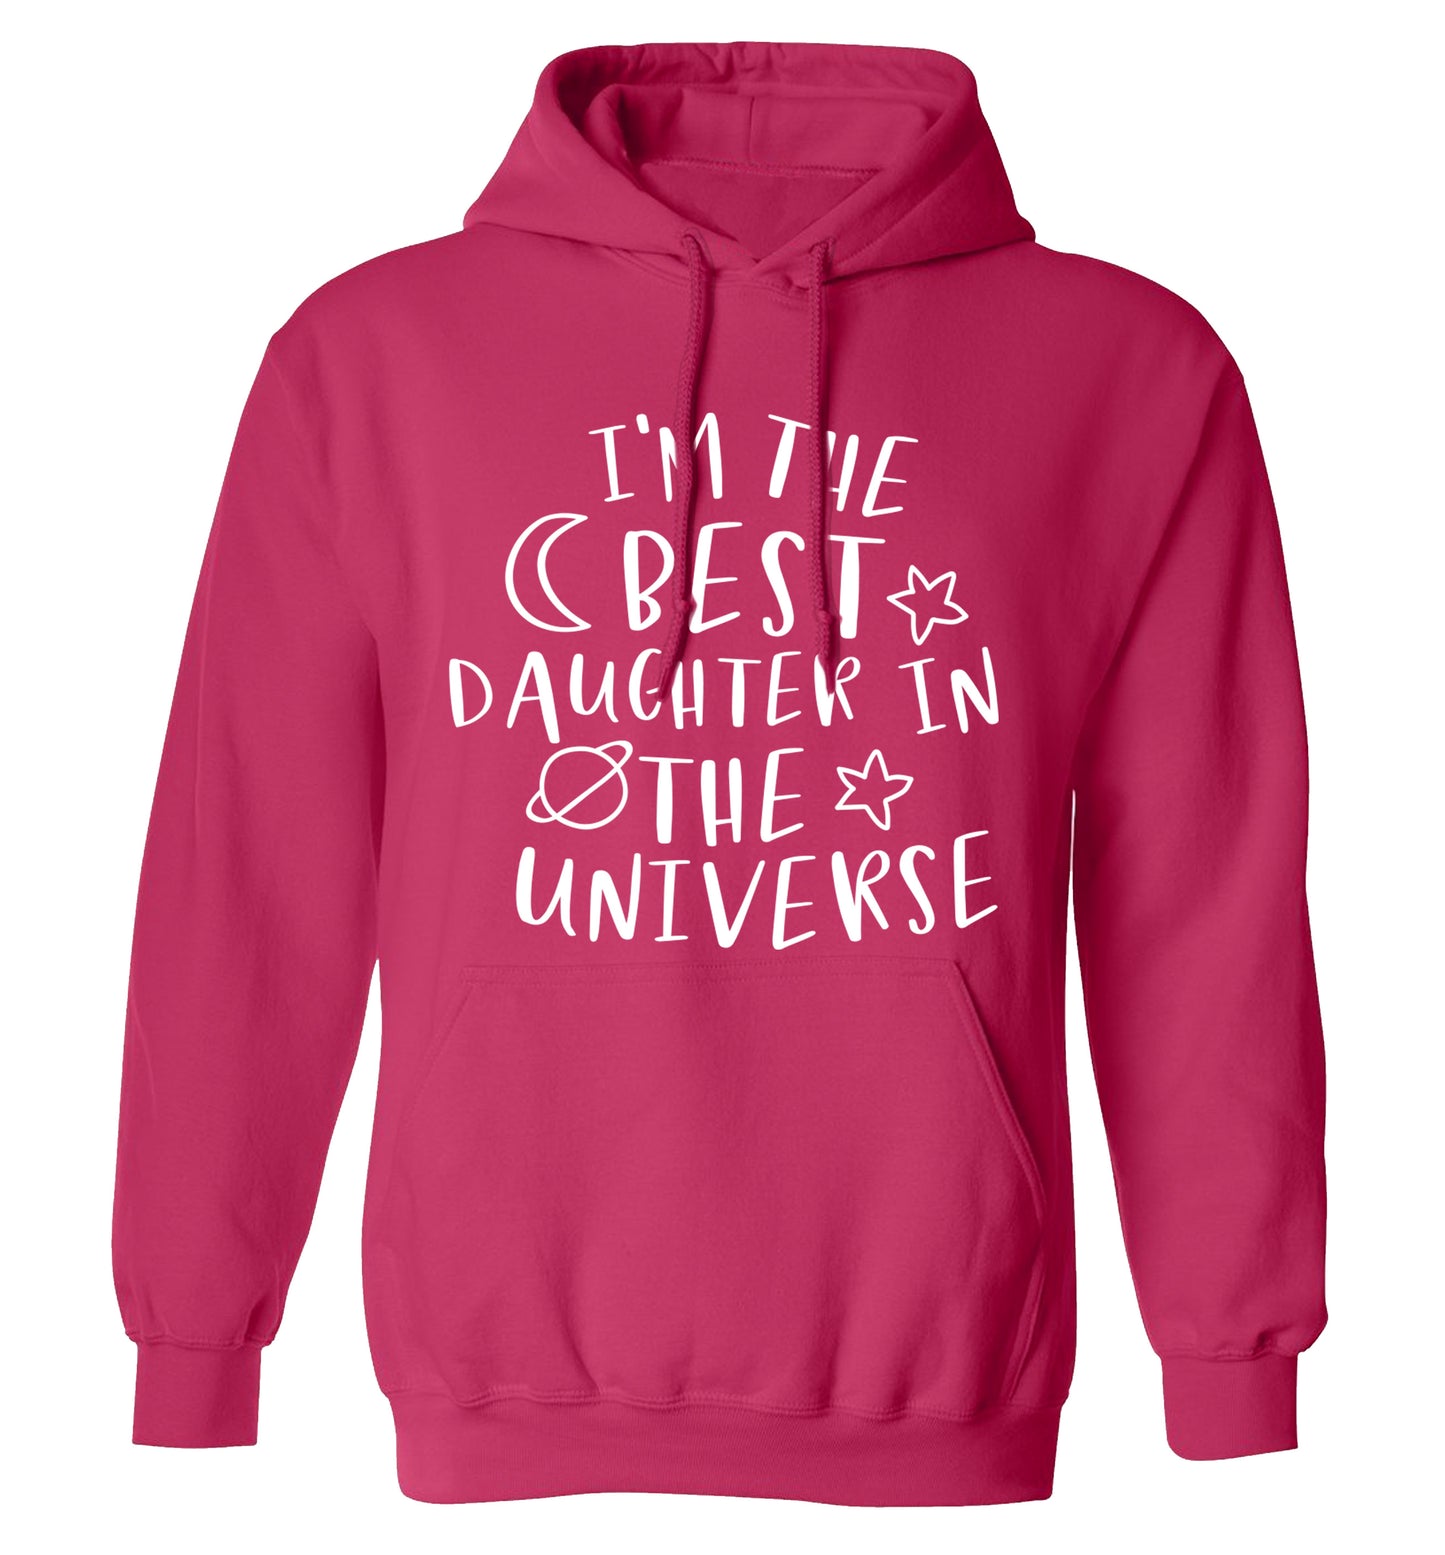 I'm the best daughter in the universe adults unisex pink hoodie 2XL